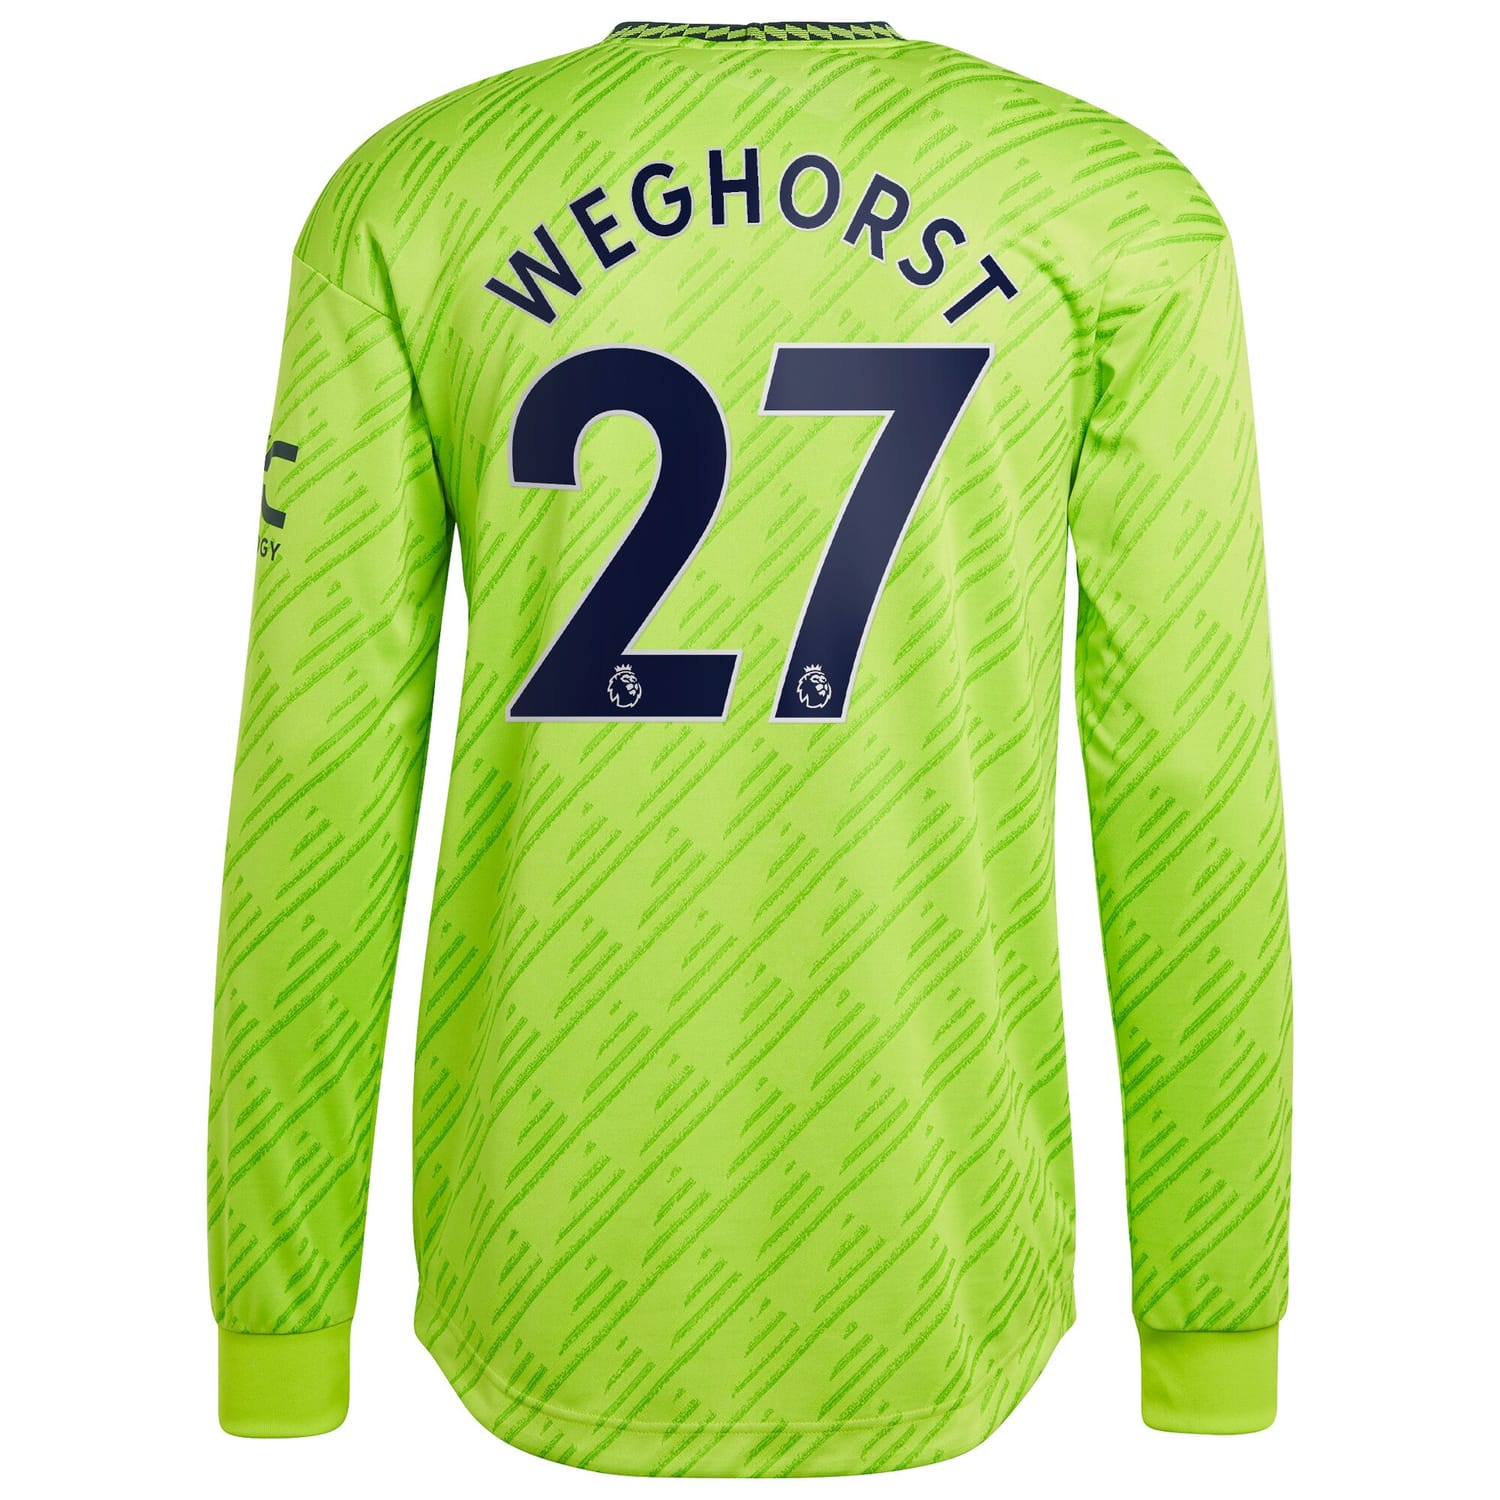 Premier League Manchester United Third Authentic Jersey Shirt Long Sleeve 2022-23 player Wout Weghorst 27 printing for Men